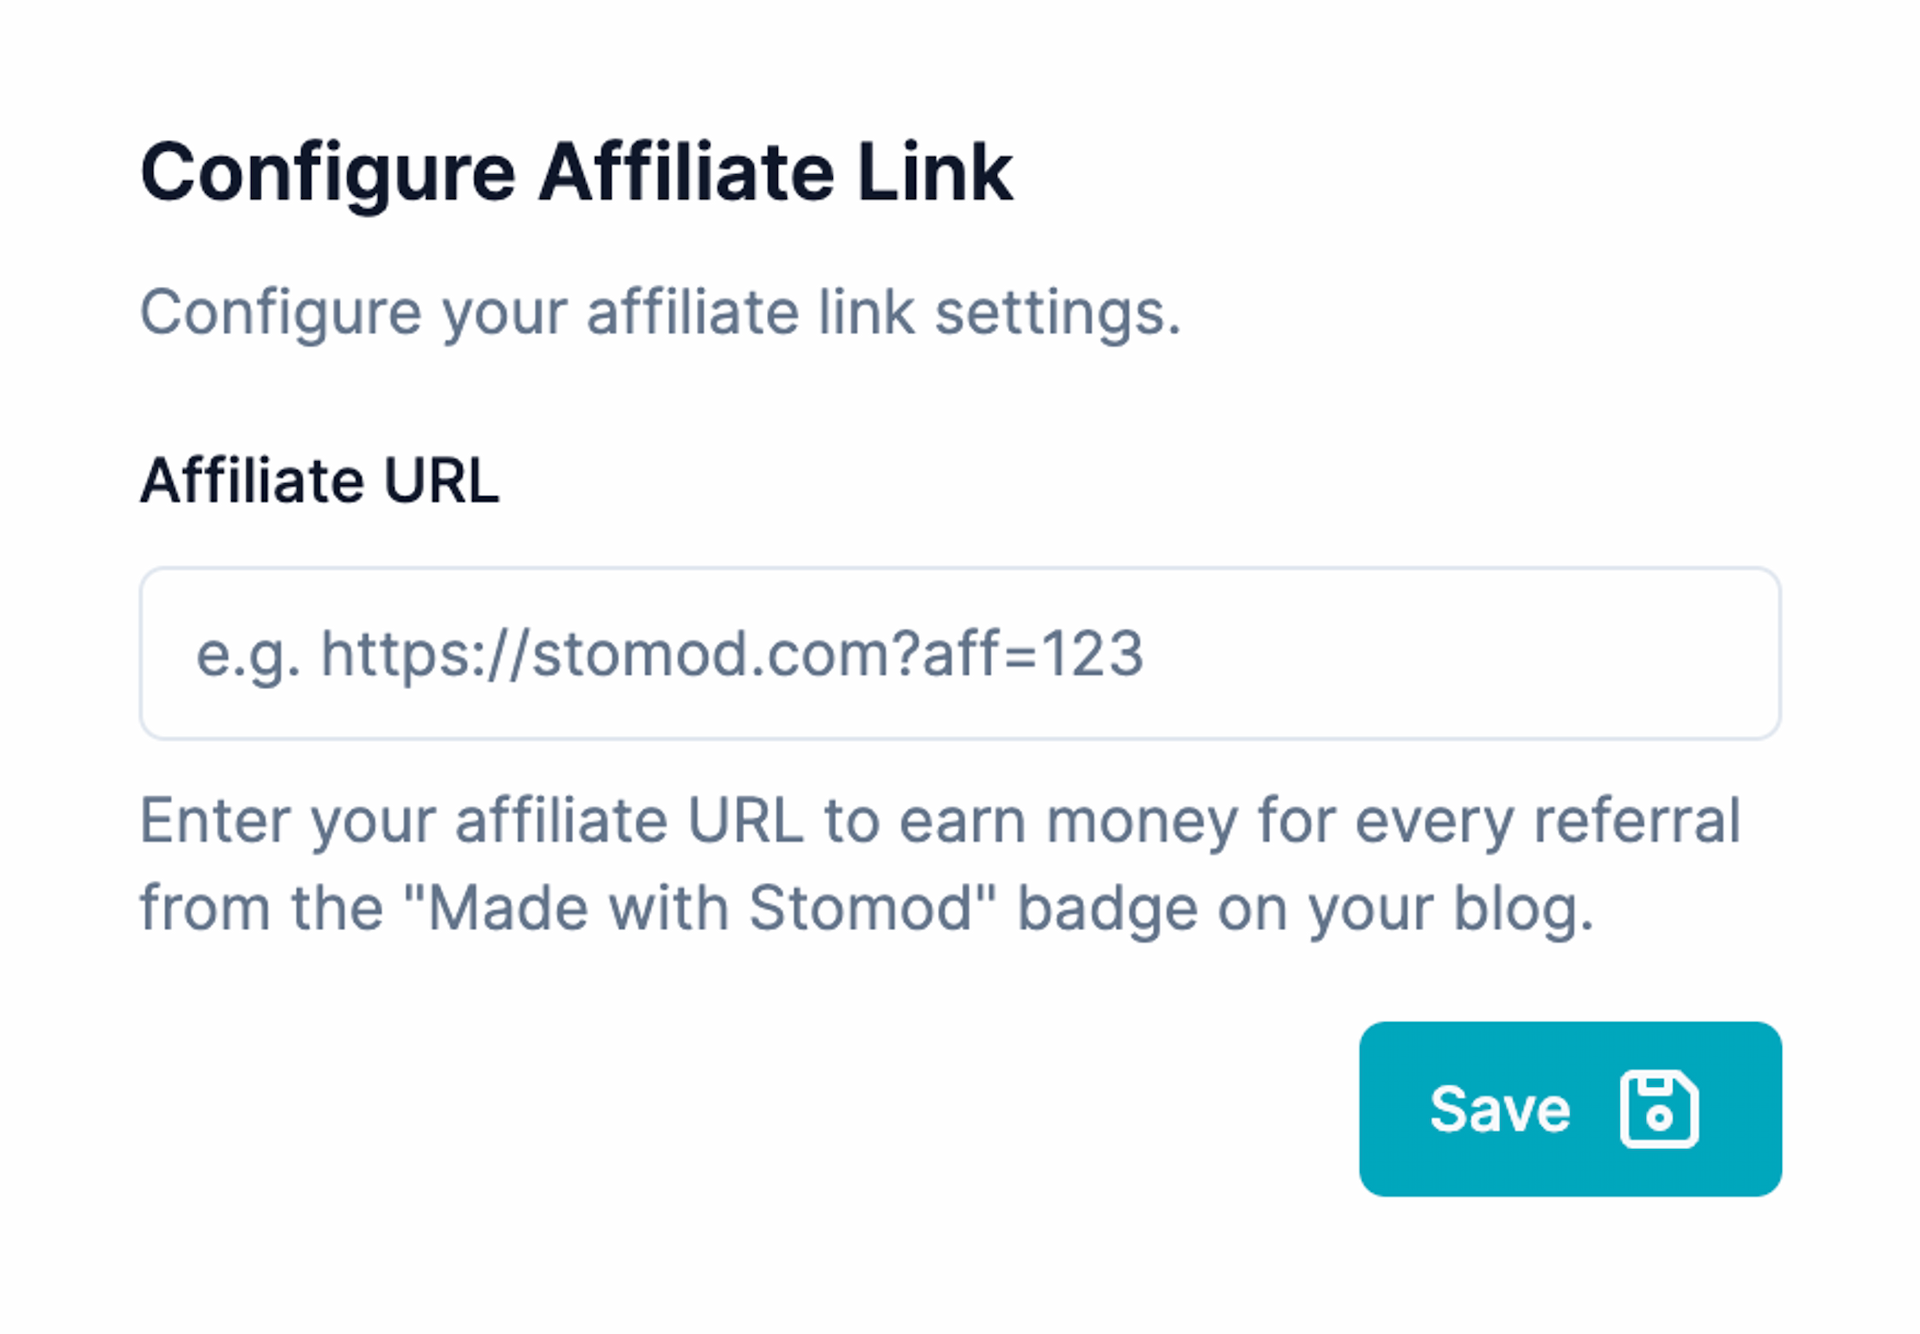 Settings up your affiliate URL